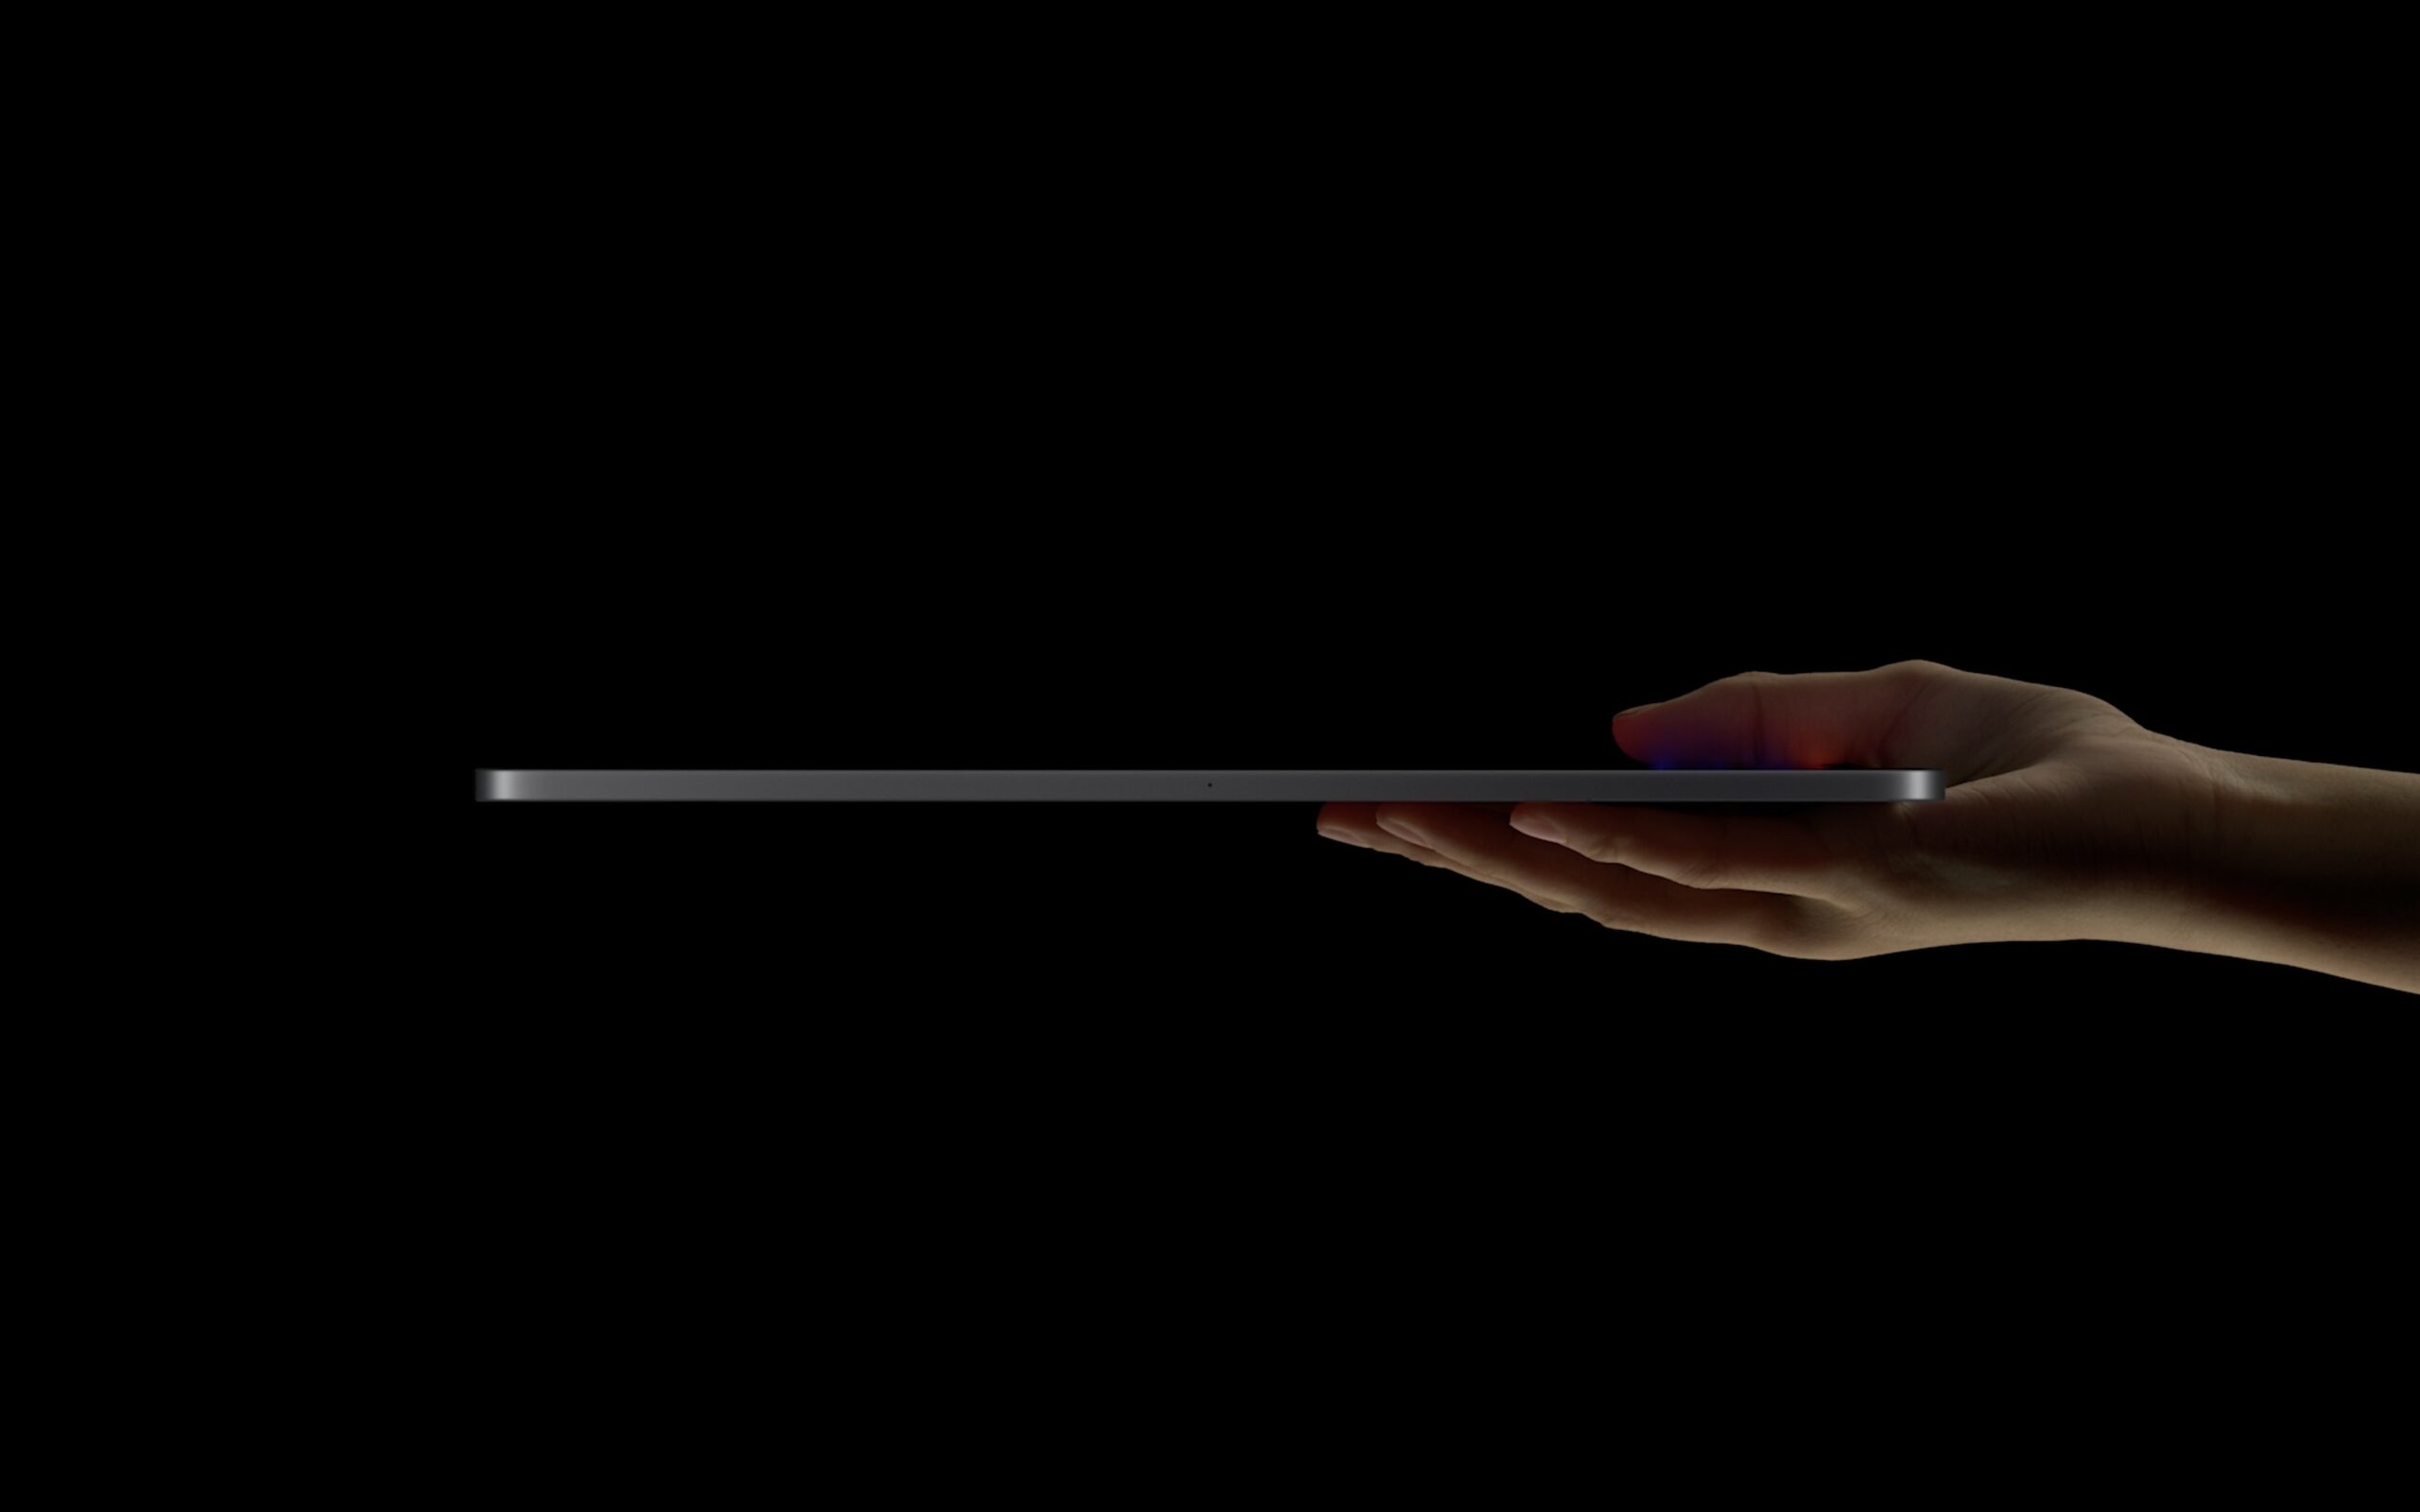 iPad Pro 2021: Everything you need to know